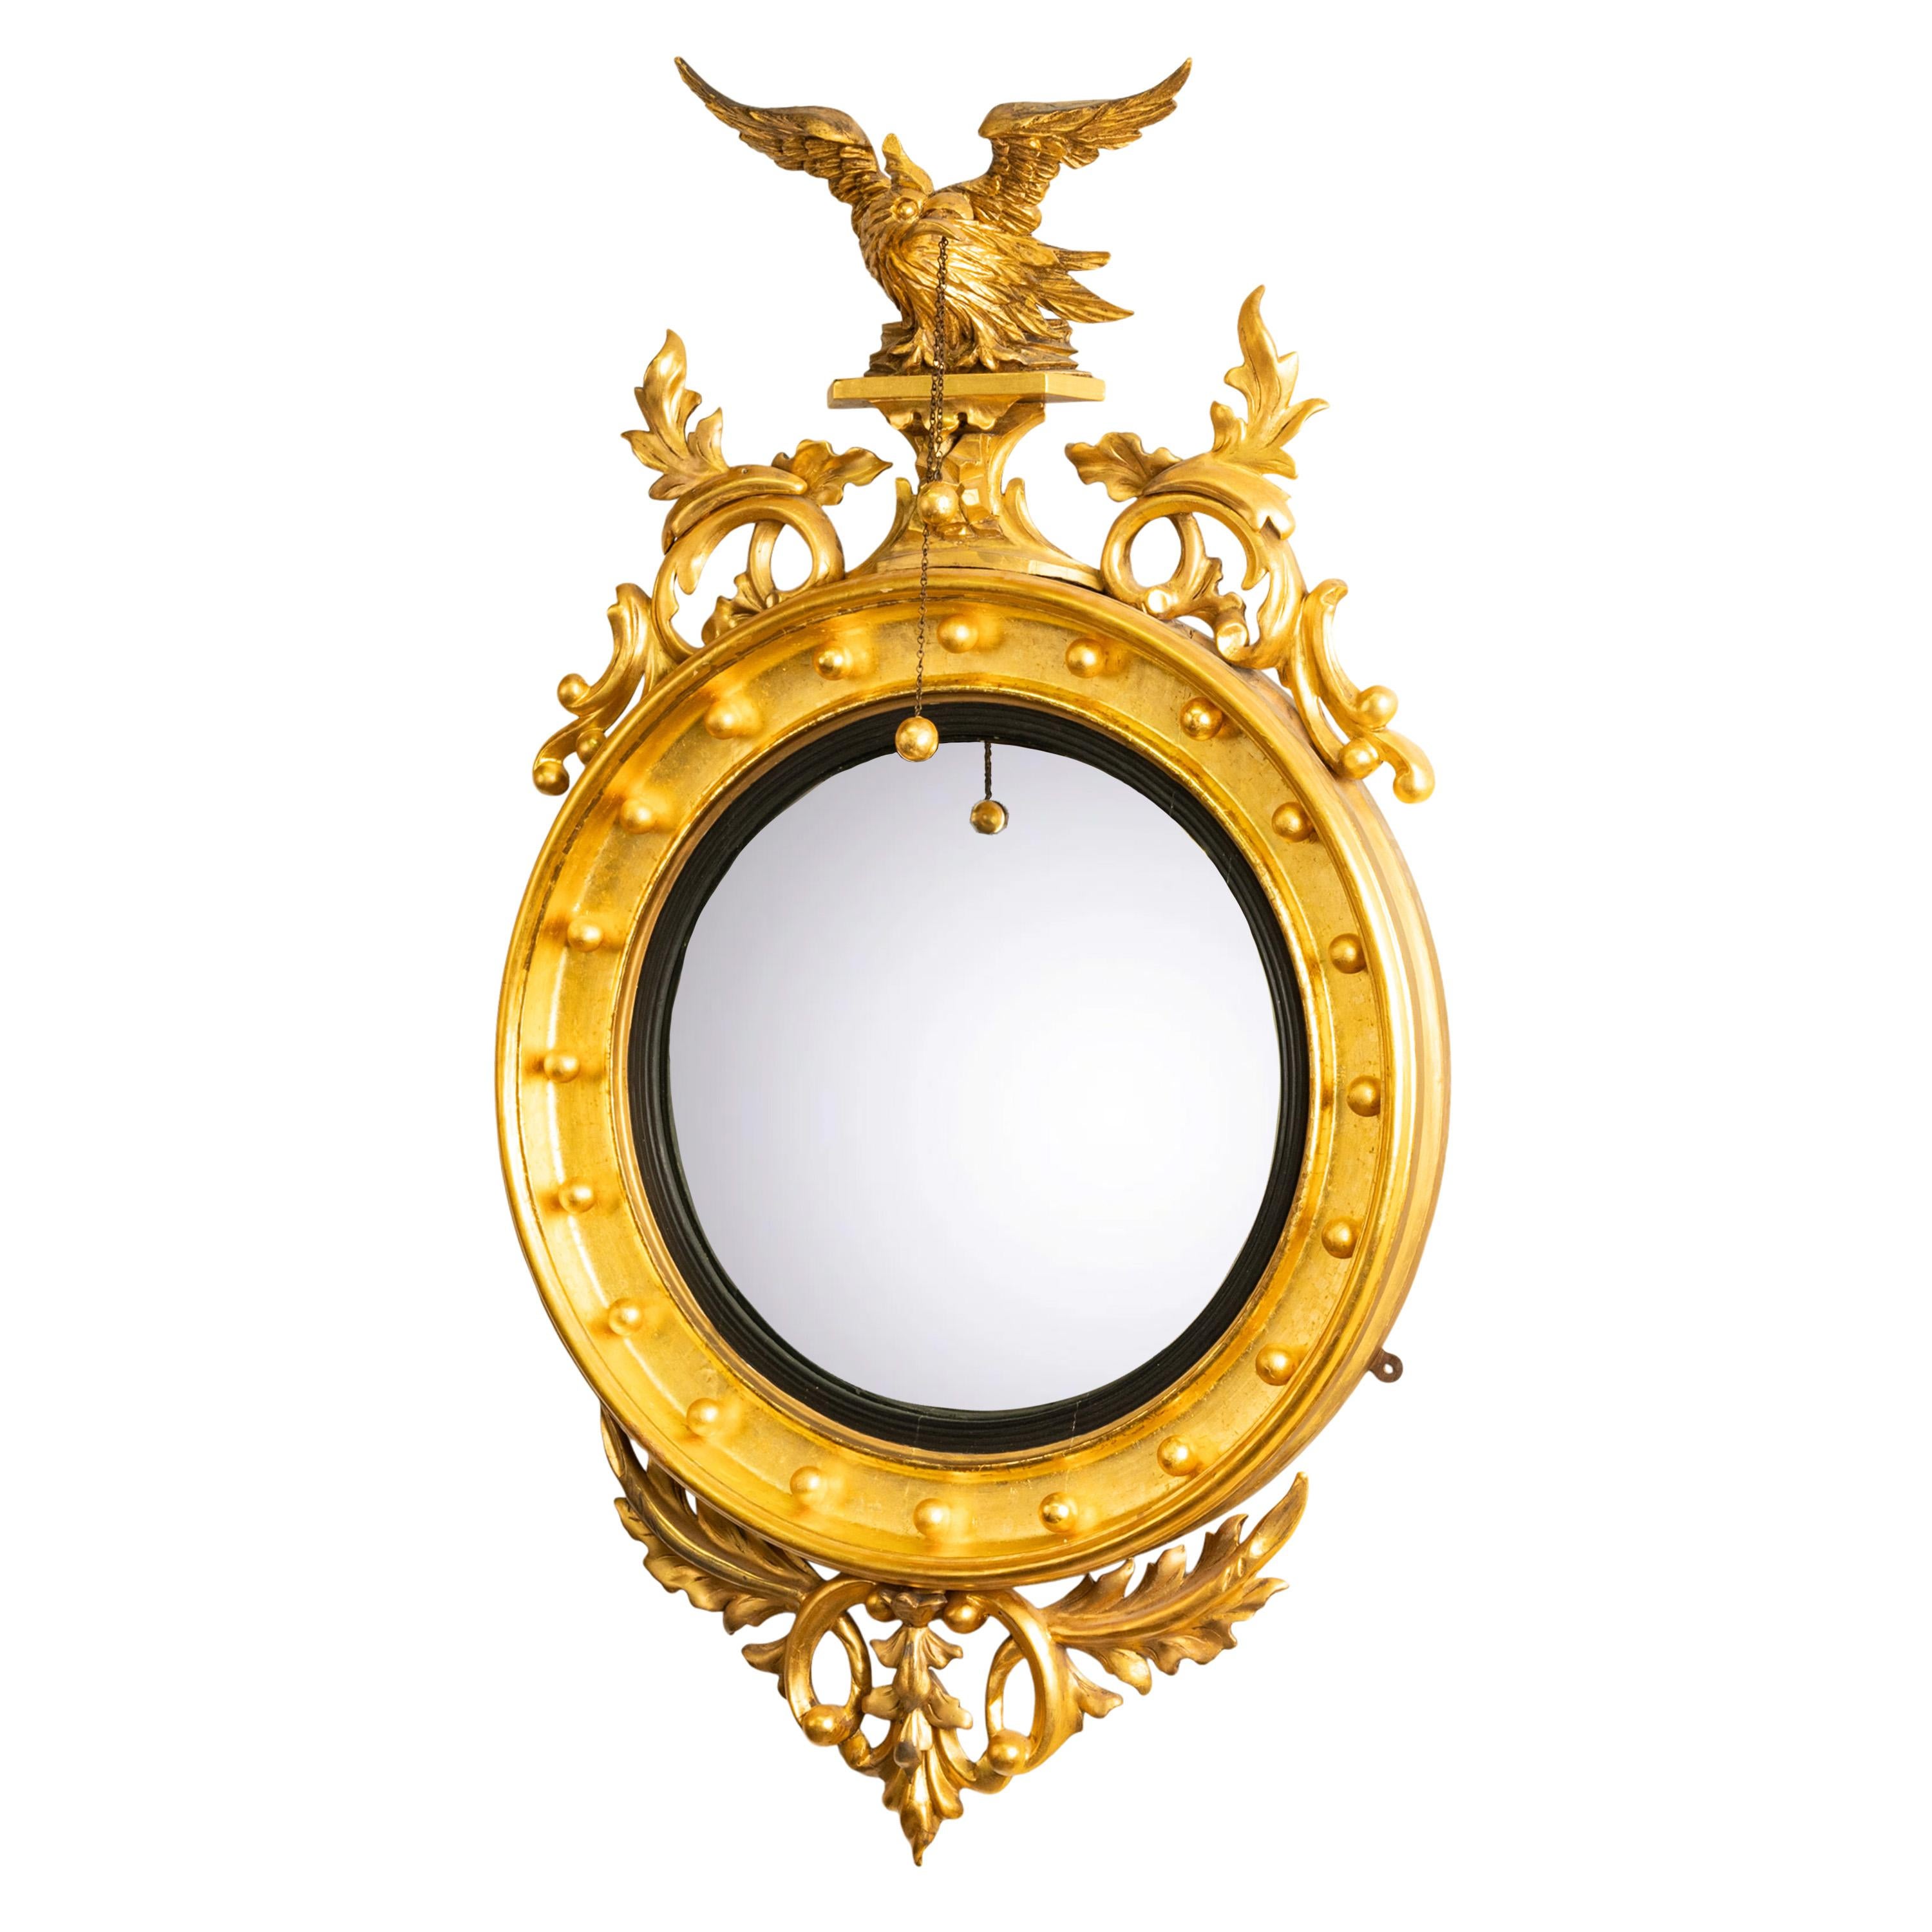 Carved Antique Early 19thC American Federal Period Convex Gilt Wood Eagle Mirror 1820 For Sale